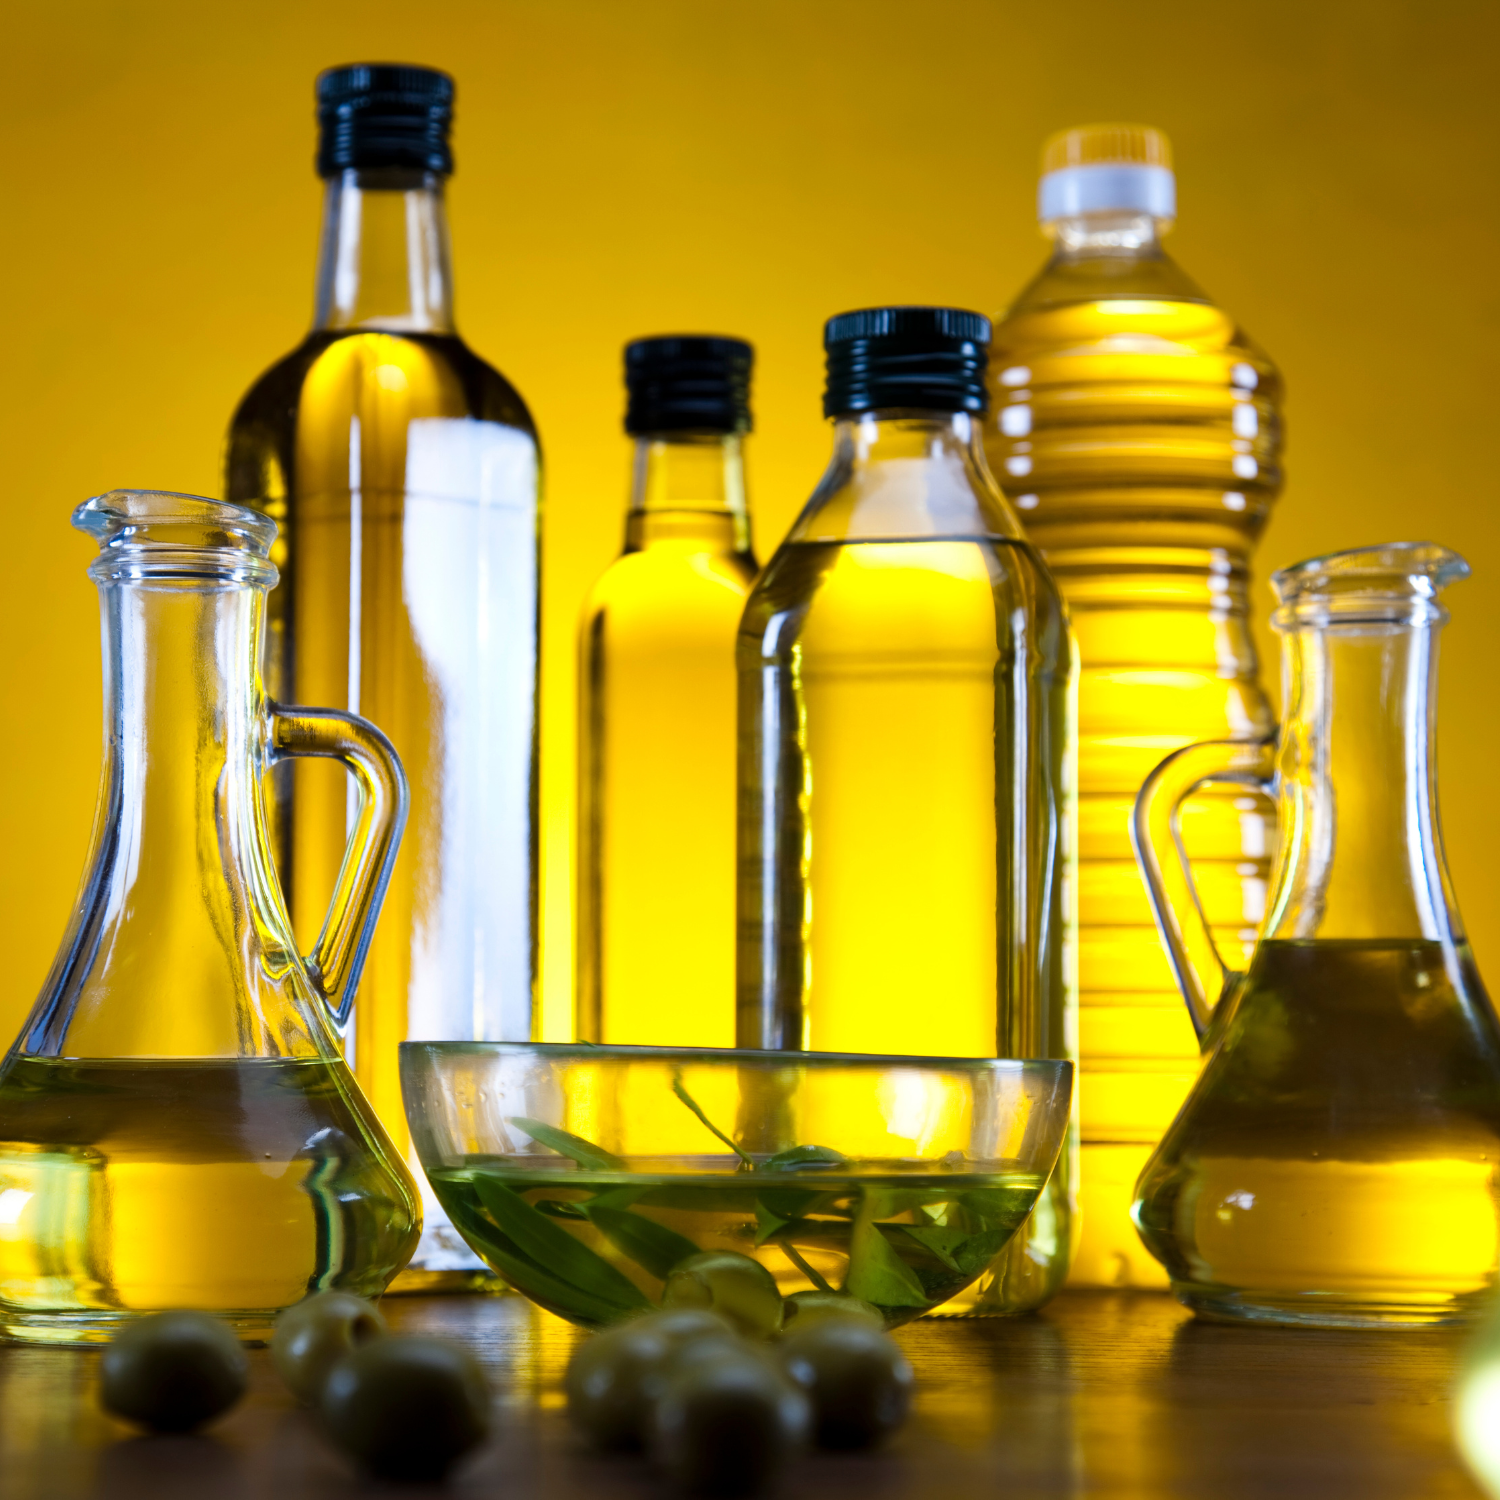 Carrier Oils For Diluting Essential Oils